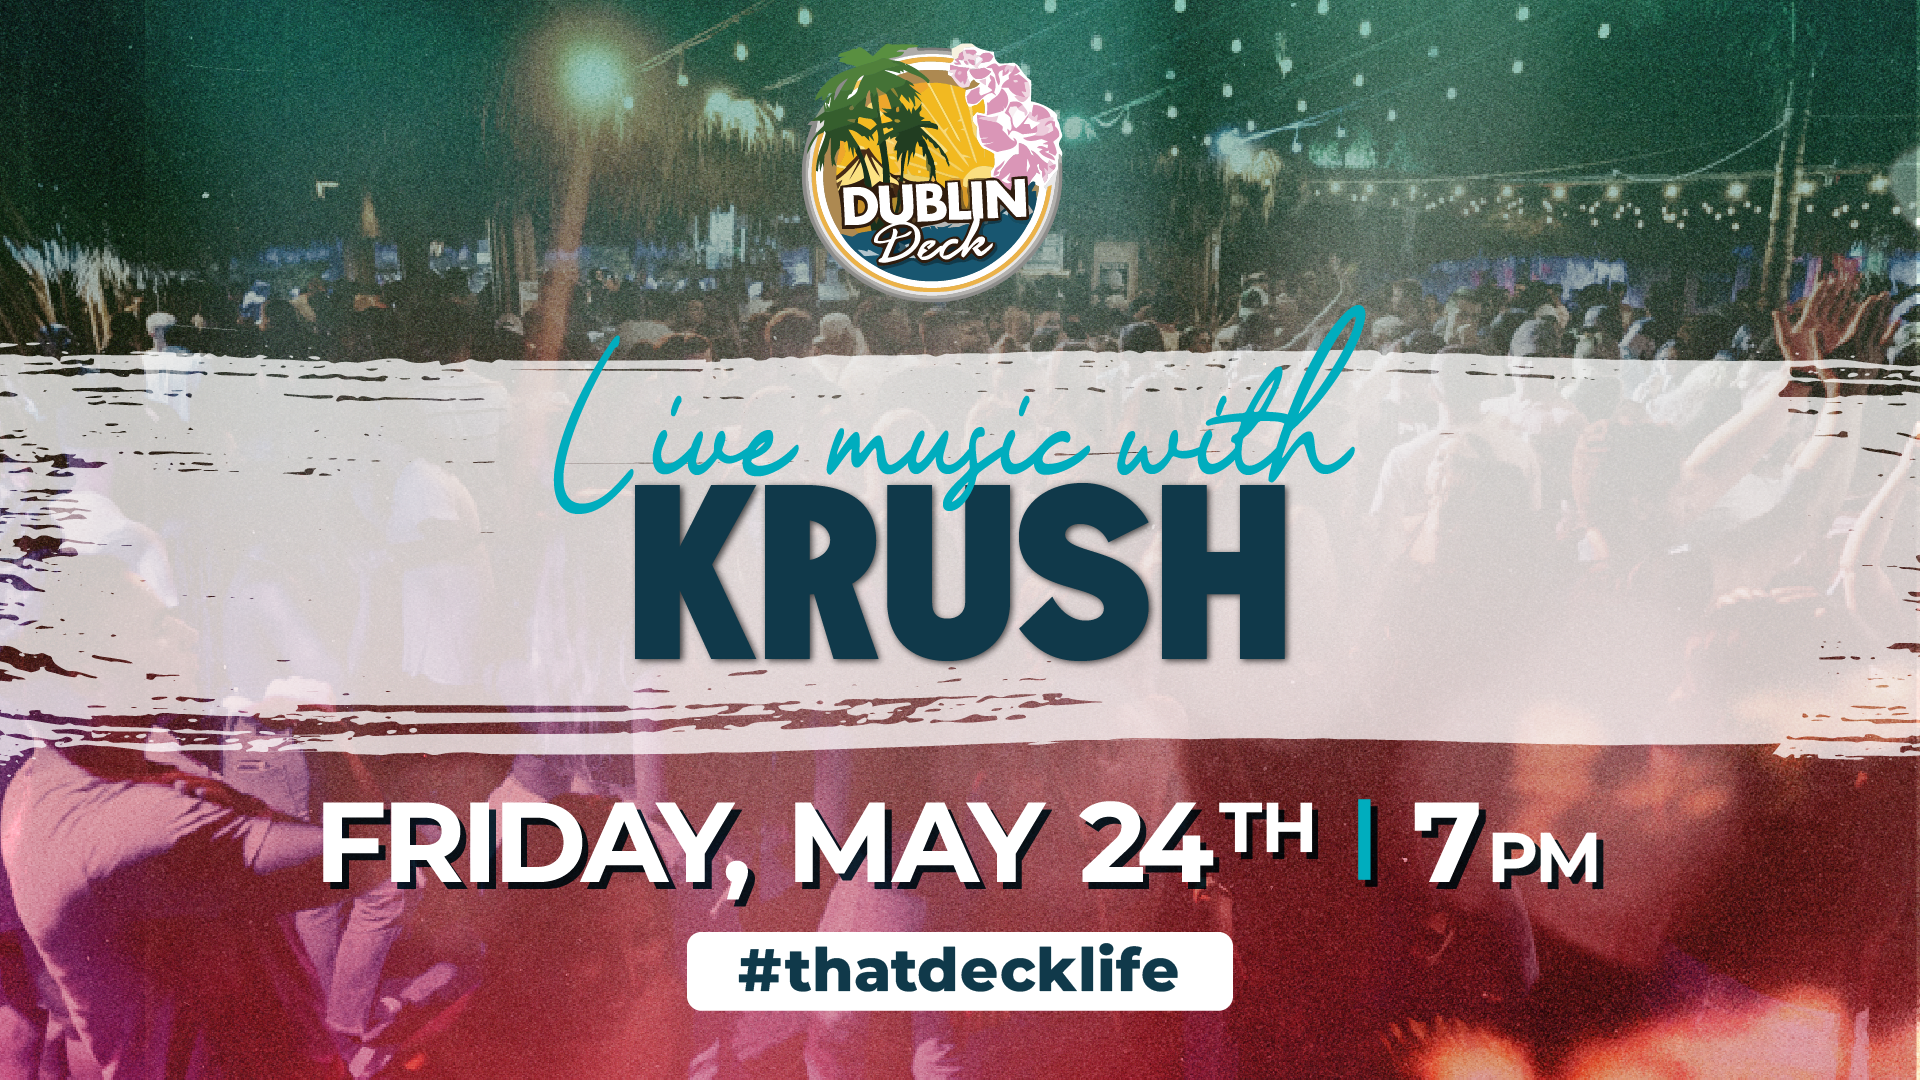 flyer for live music on may 24 at 7pm with Krush